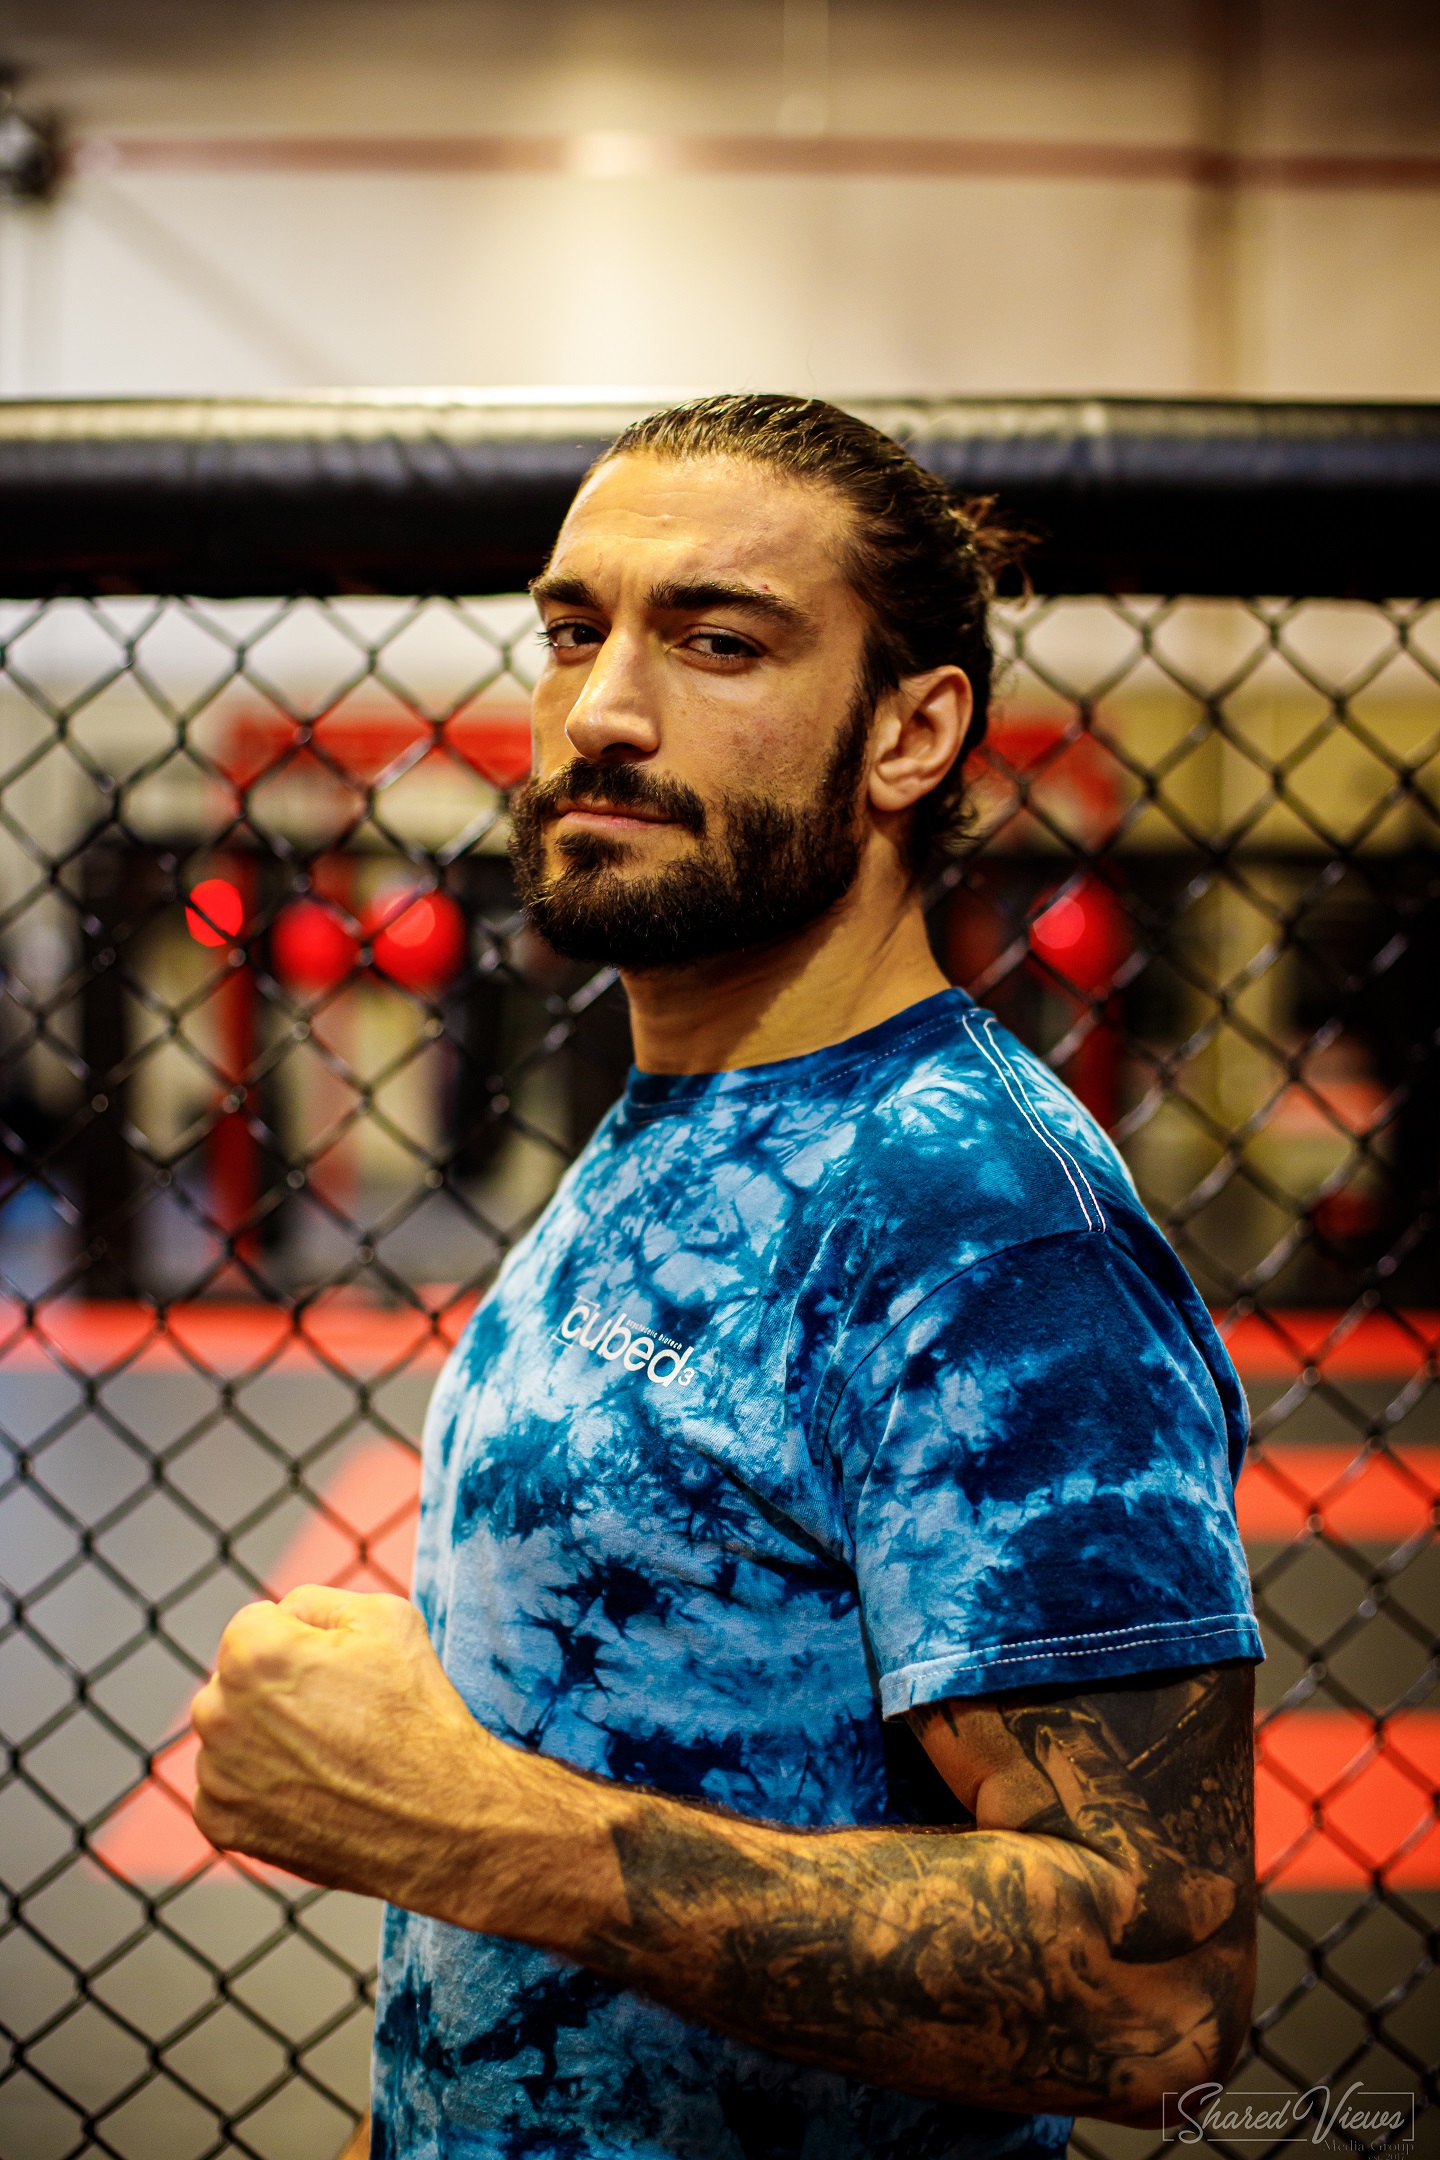 Since his release from the UFC in 2018, Theodorou has advocated for medical cannabis in sports